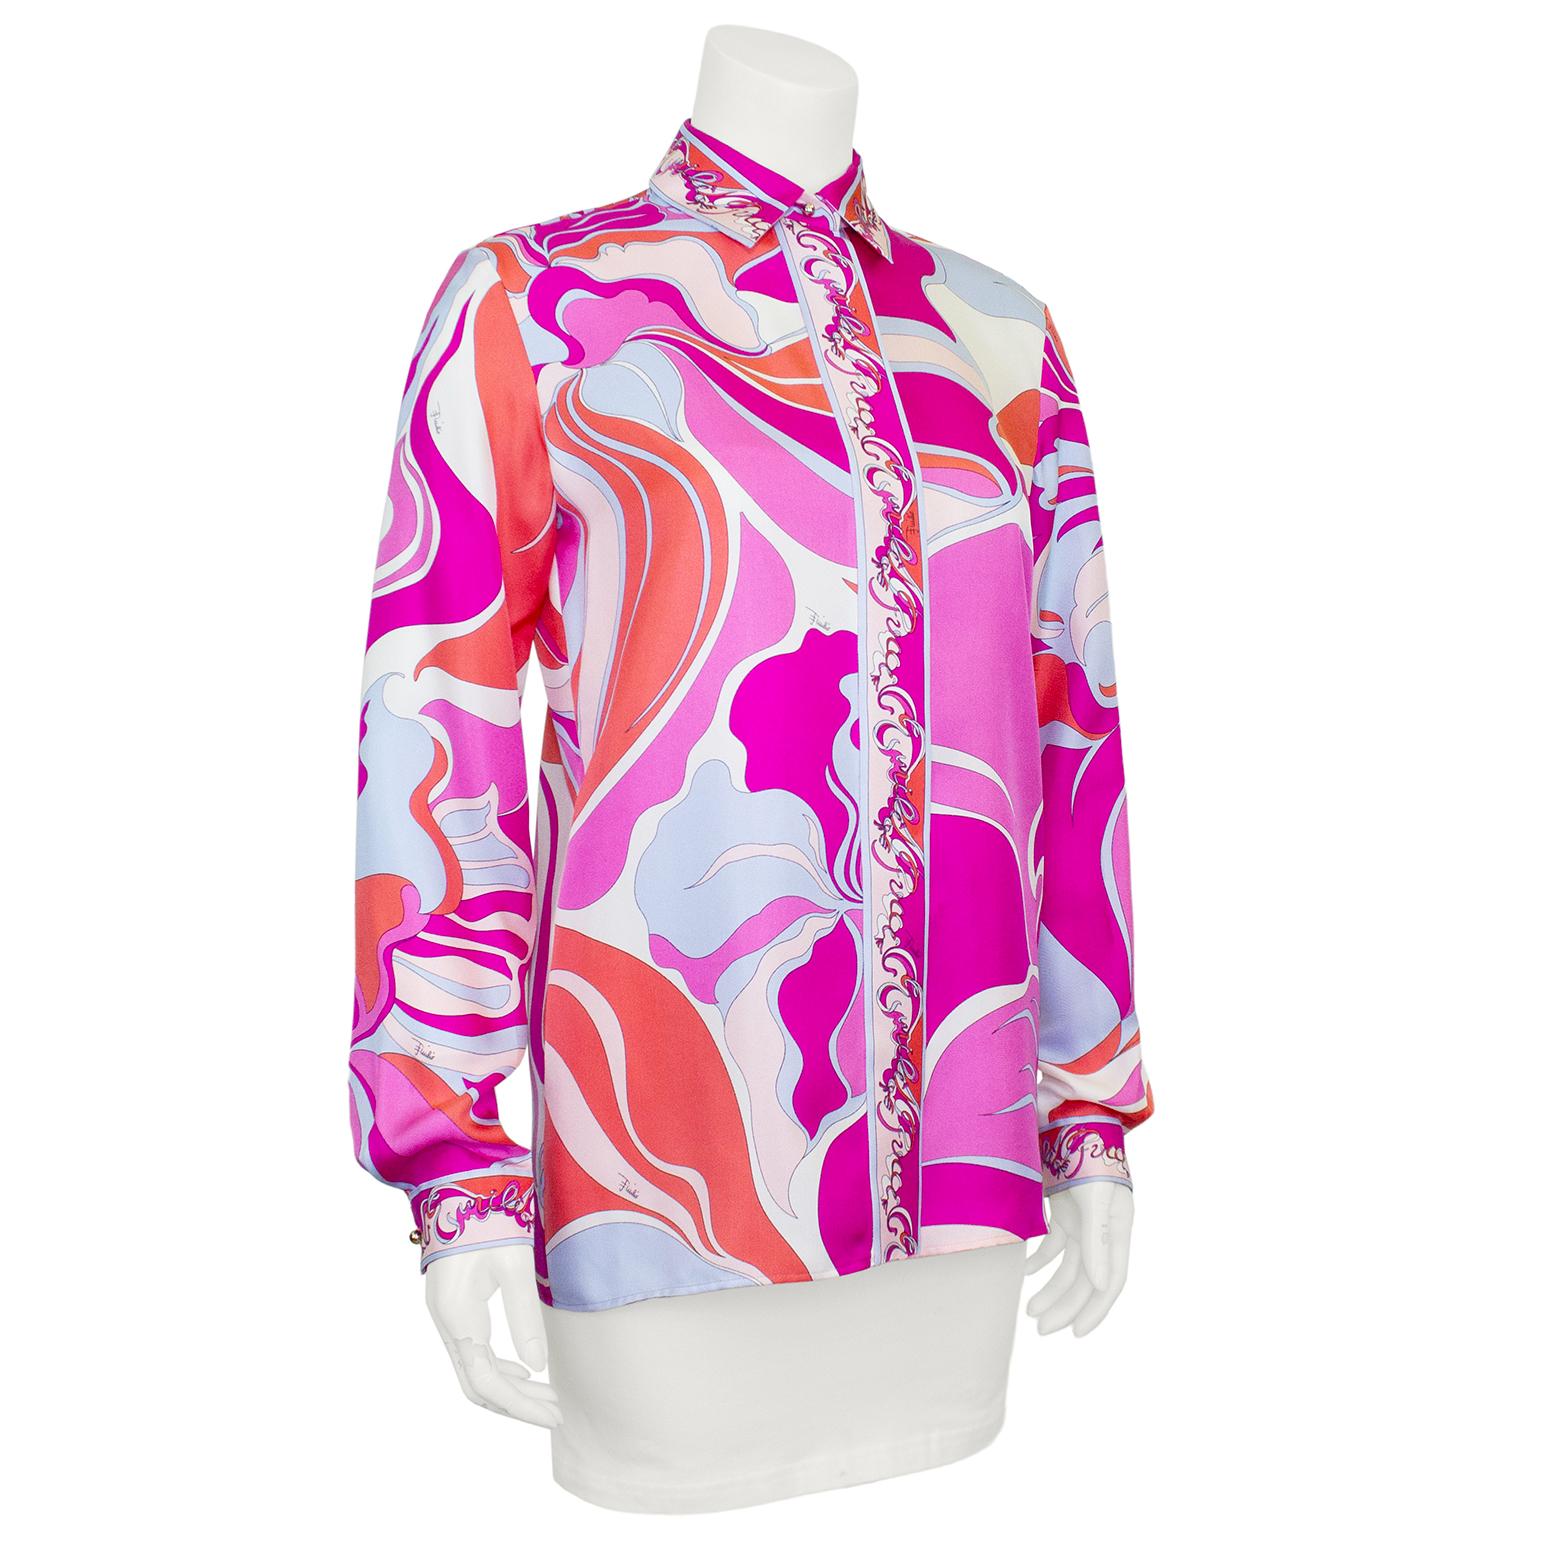 Absolutely stunning Emilio Pucci blouse from the early 2000s. Luscious silk with an all over abstract print in shades of orange, pink and pale blue. The collar, placket and cuffs read Emilio Pucci over and over in a beautiful abstract script. Gold